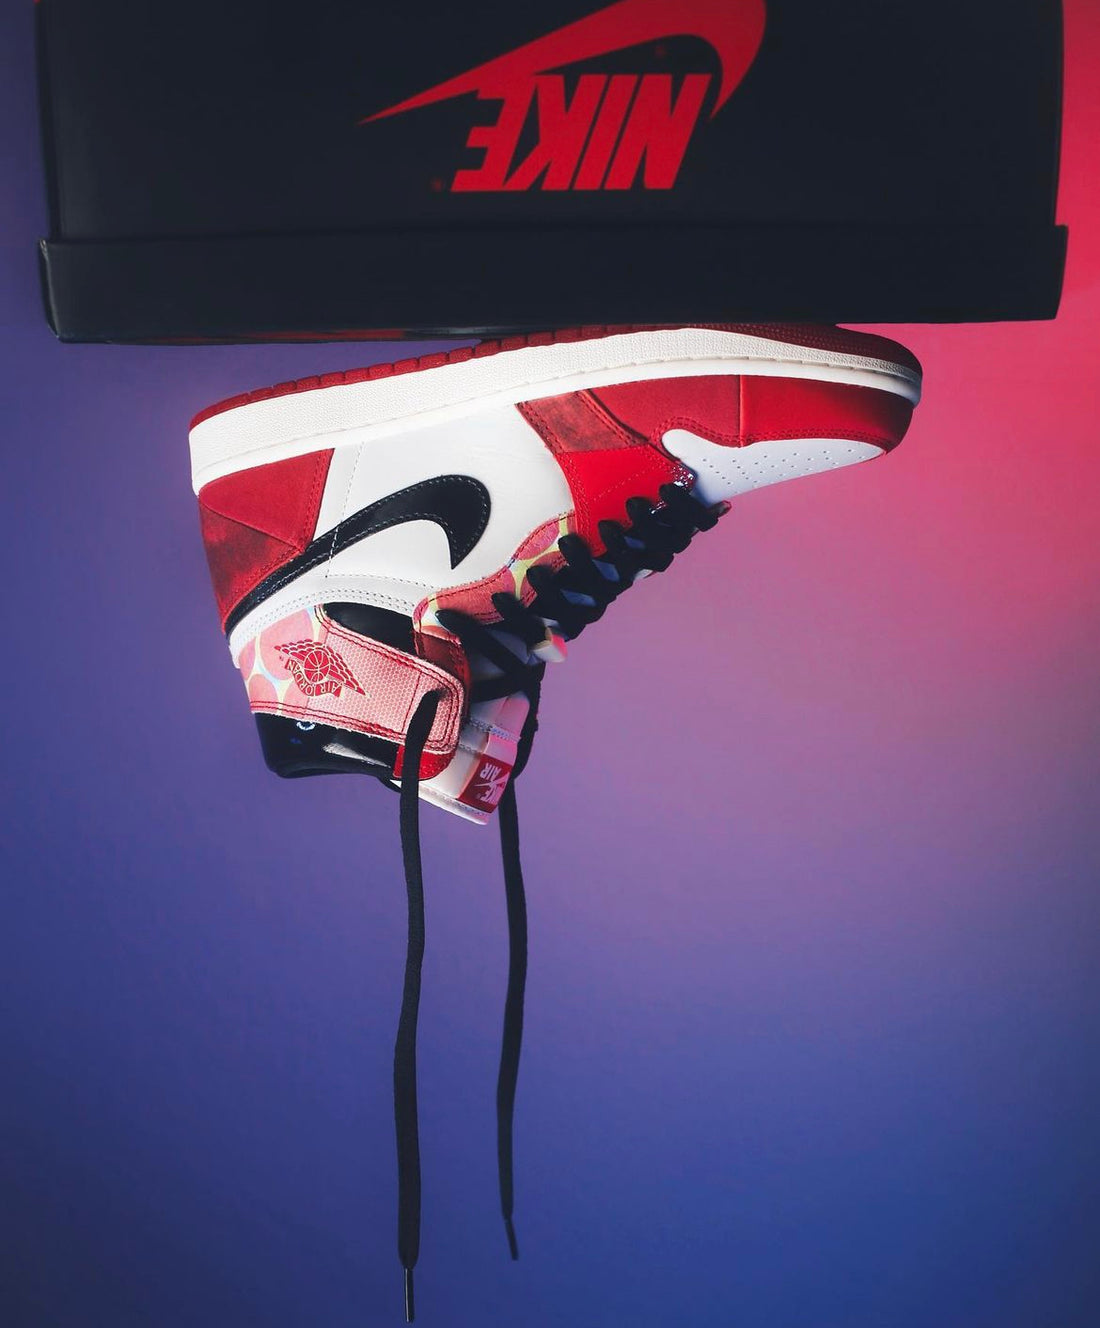 Web Swing into the "Next Chapter" with the Spider-Man Air Jordan 1 Release